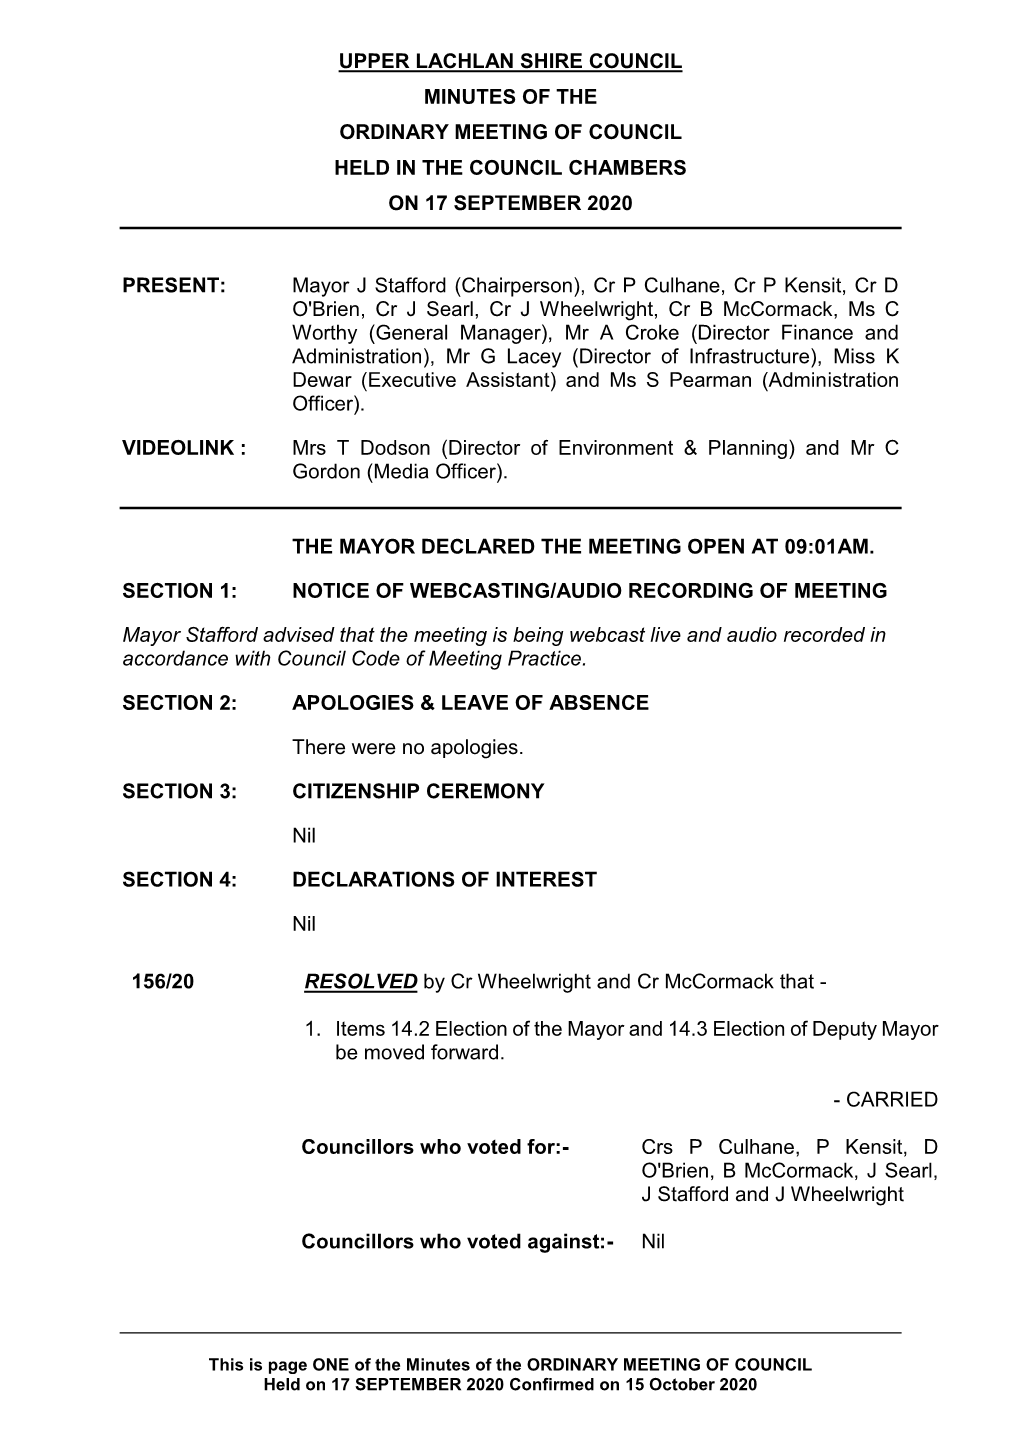 Minutes of the Ordinary Meeting of Council Held in the Council Chambers on 17 September 2020